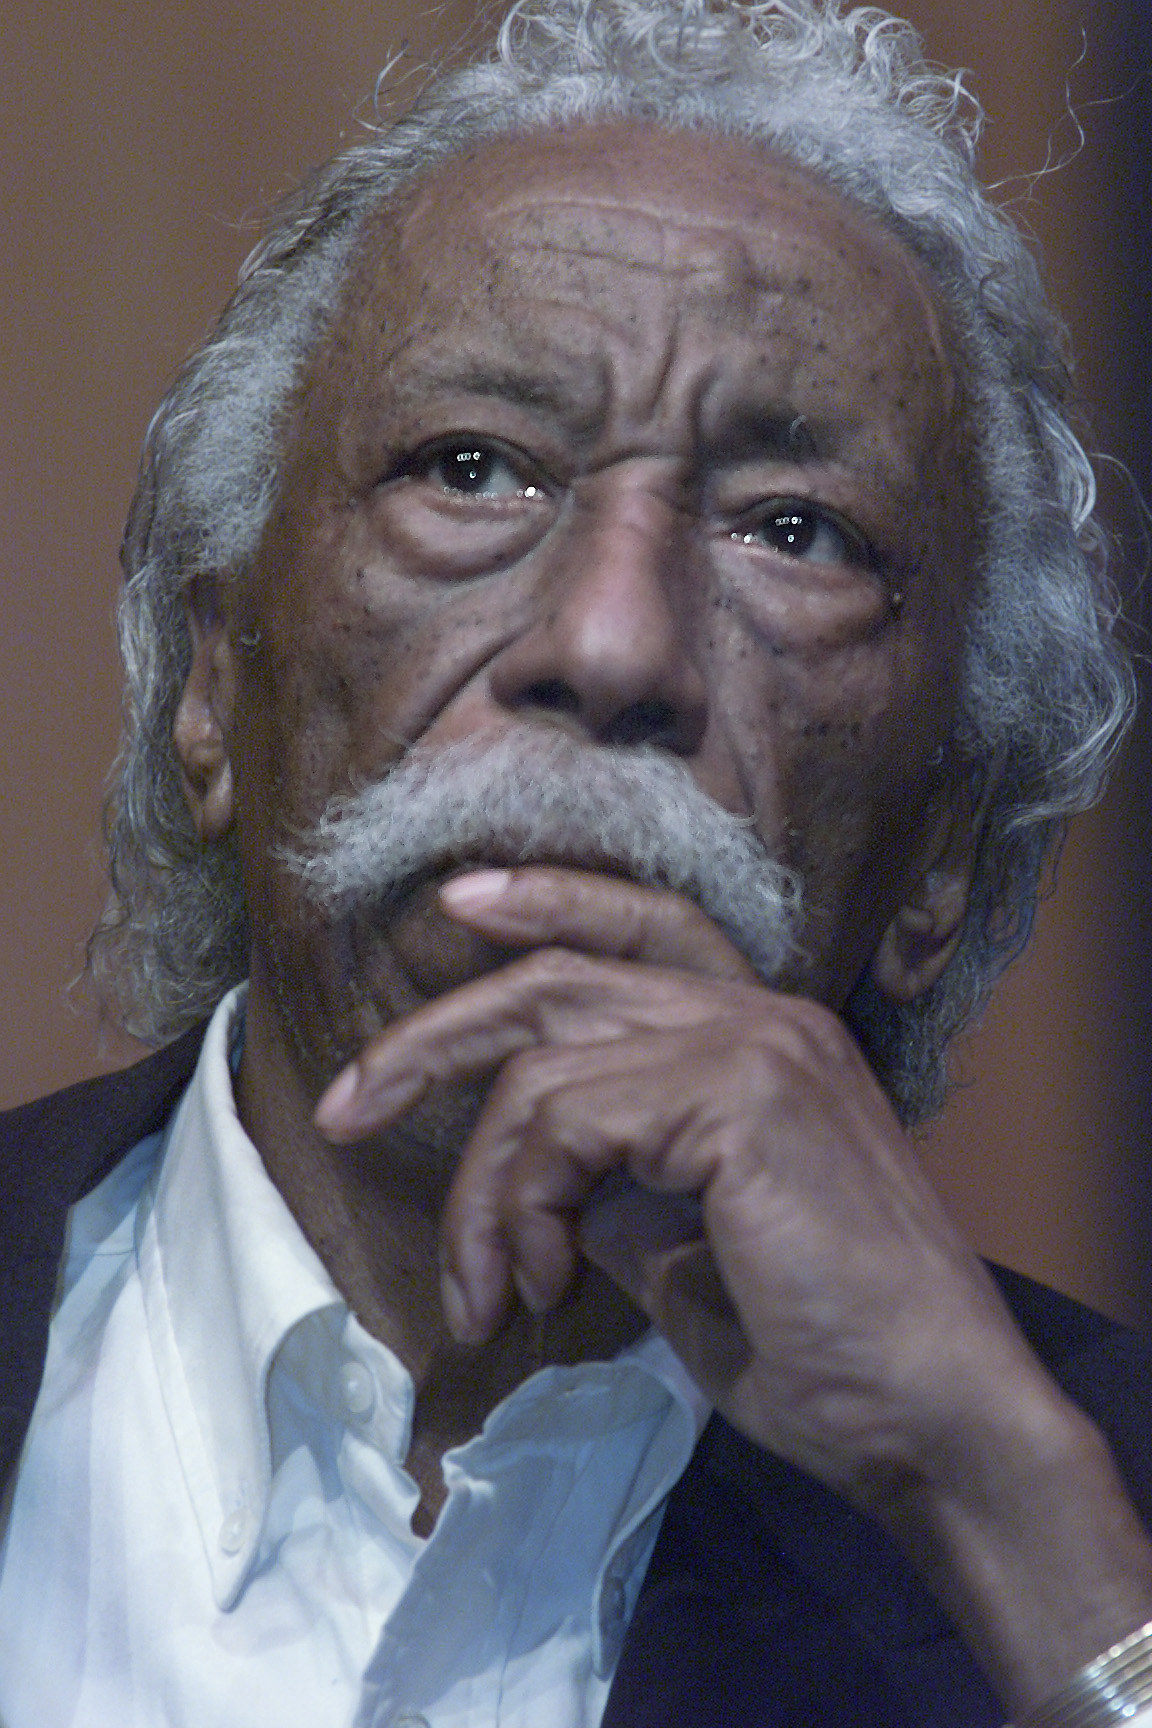 Gordon Parks sits with his hand to his chin